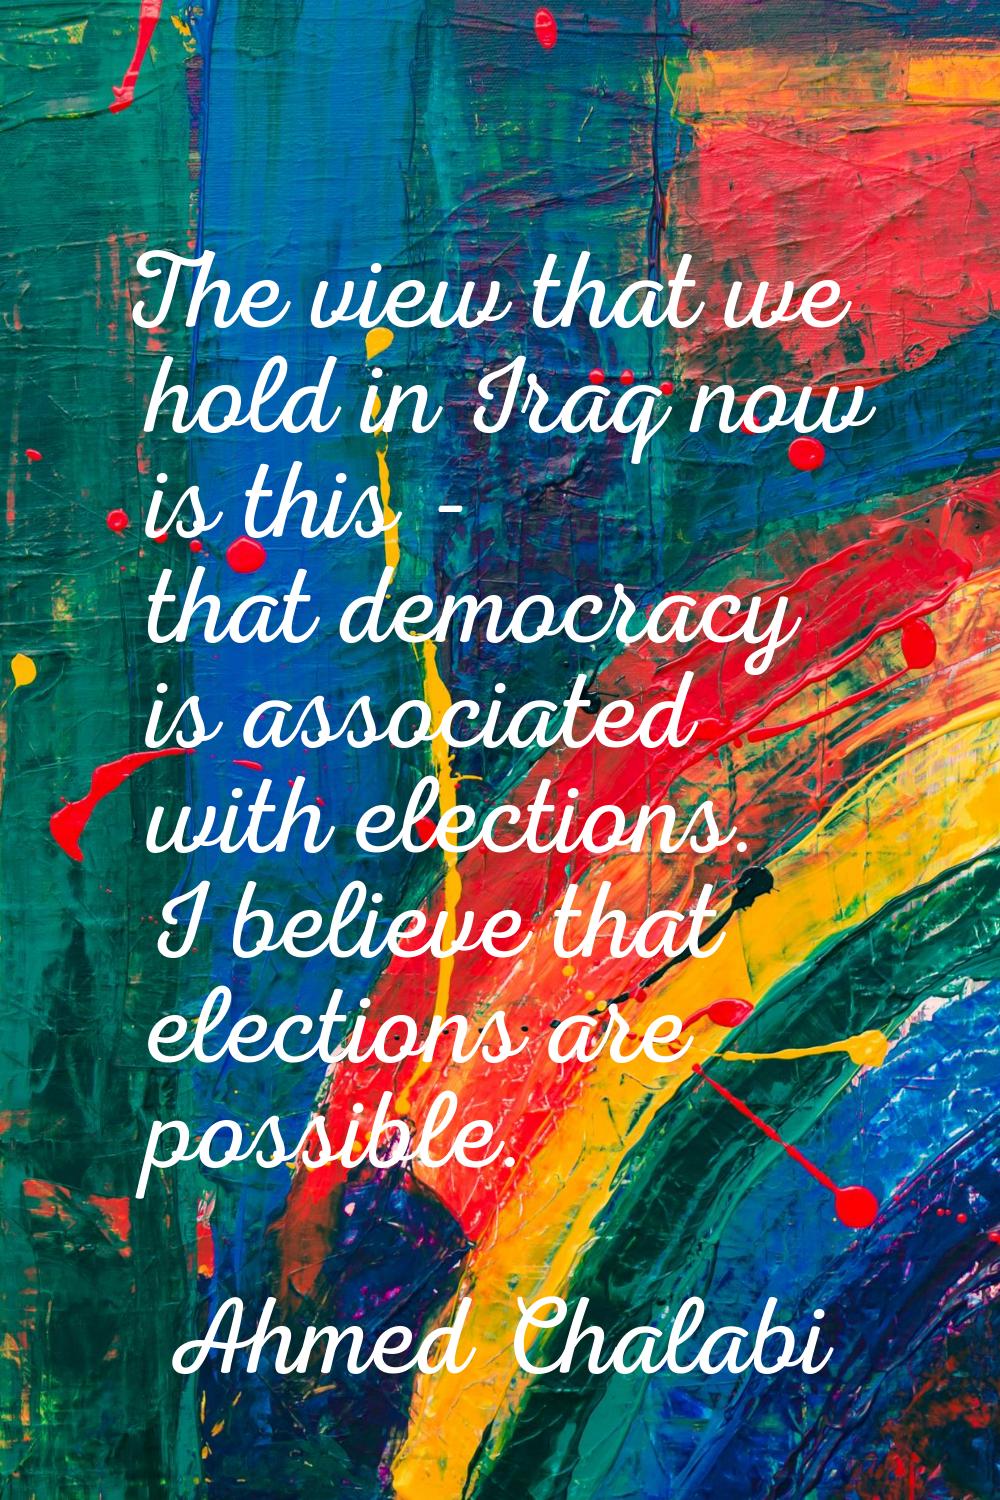 The view that we hold in Iraq now is this - that democracy is associated with elections. I believe 